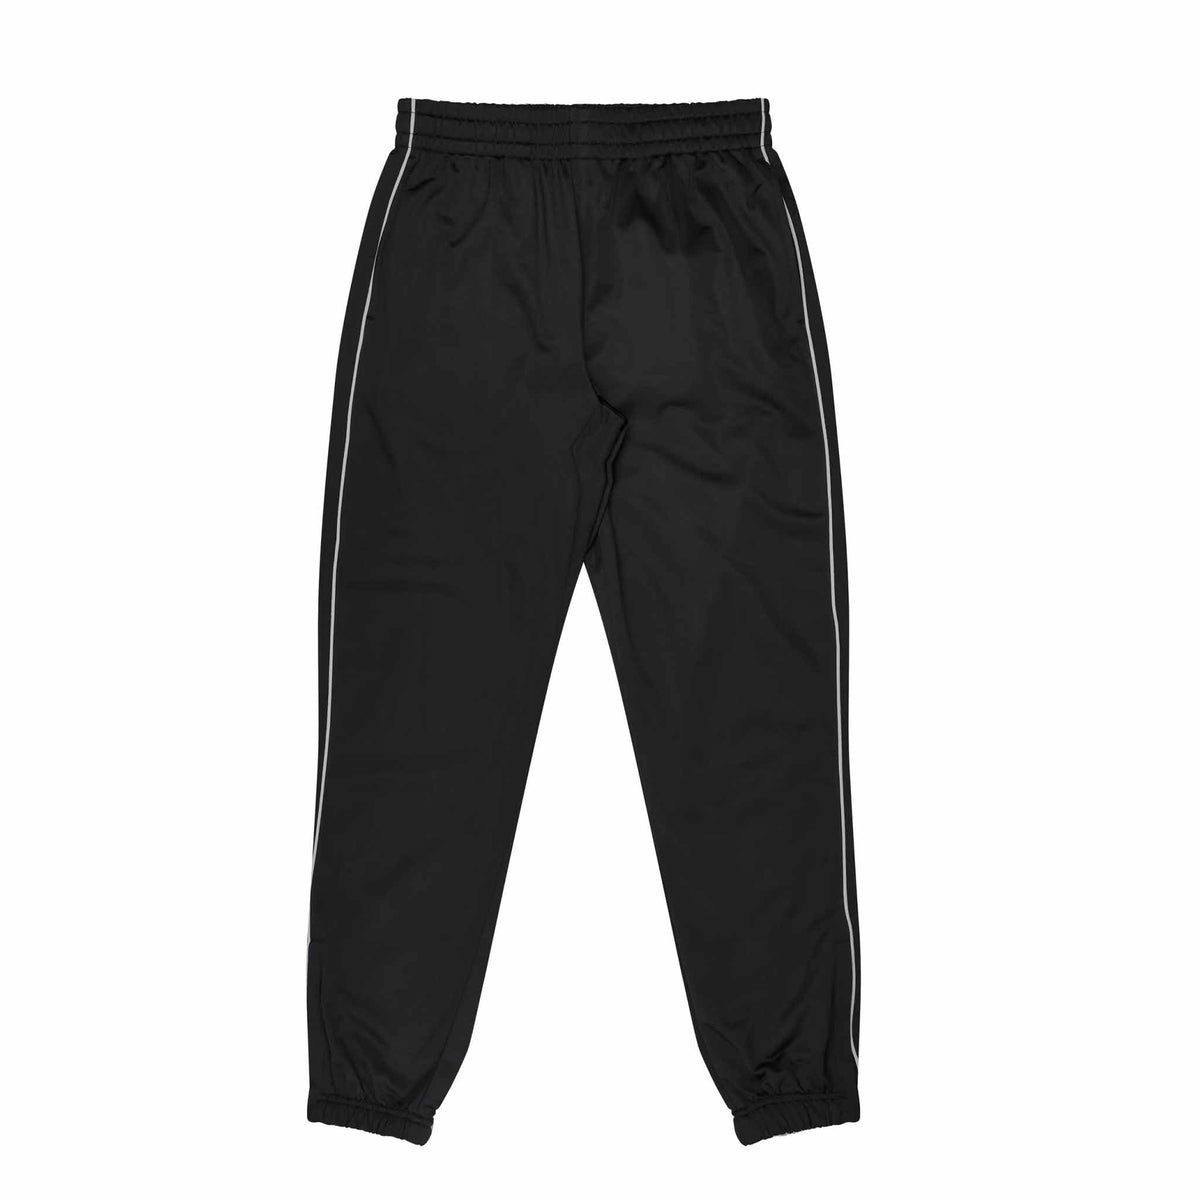 aussie pacific liverpool pants in black